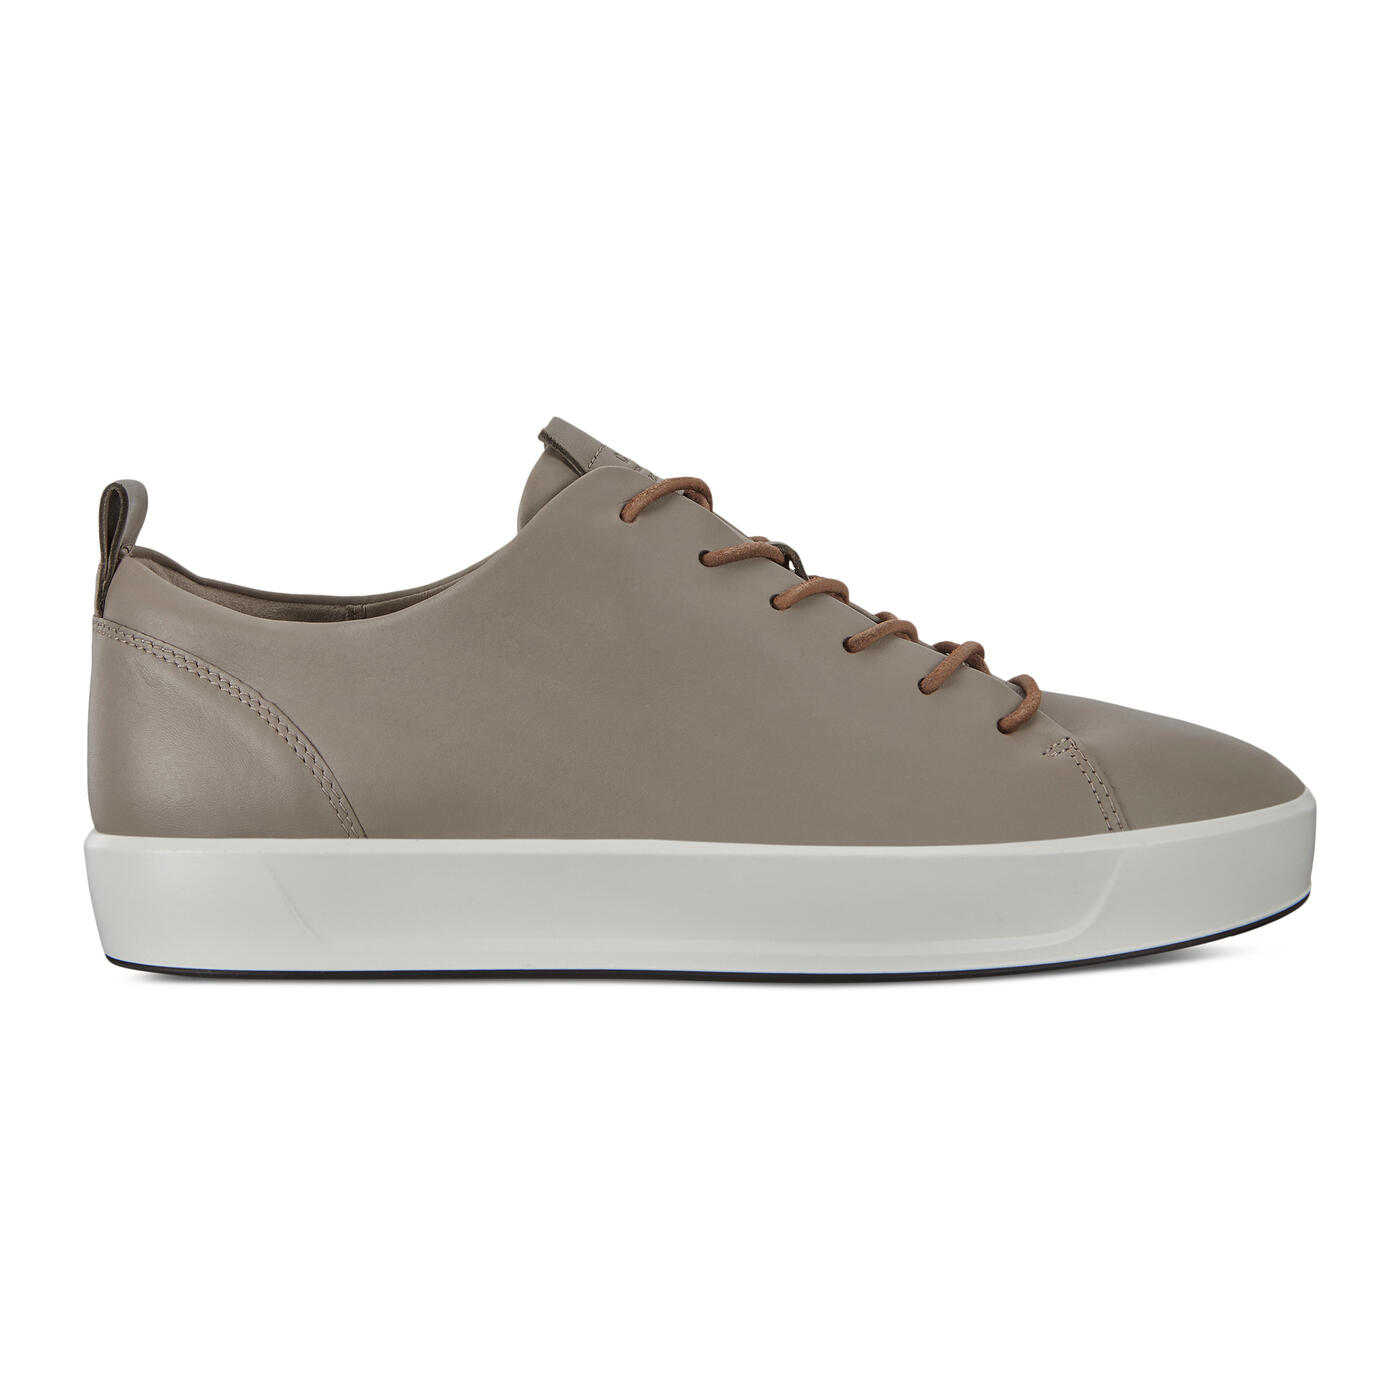 Men's Soft 8 LeatherLace Sneakers Official ECCO® Shoes